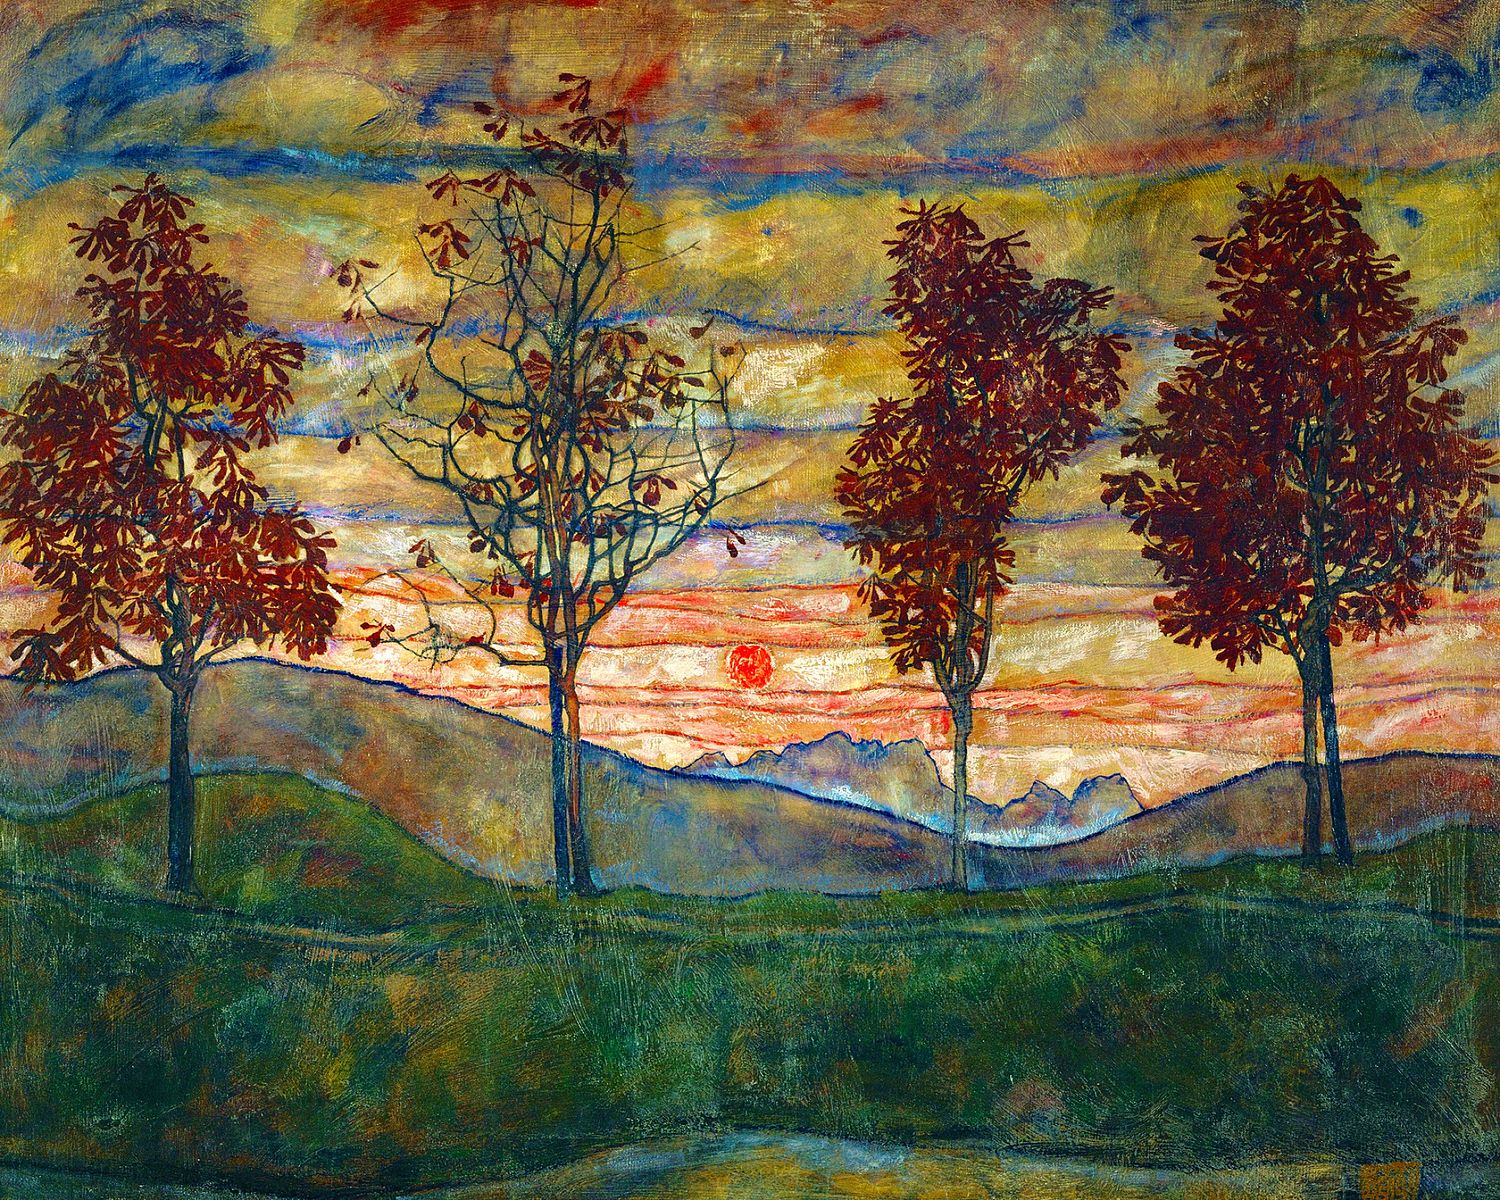 Painting, Four Trees by Egon Schiele. Four trees on a green hilly landscape.